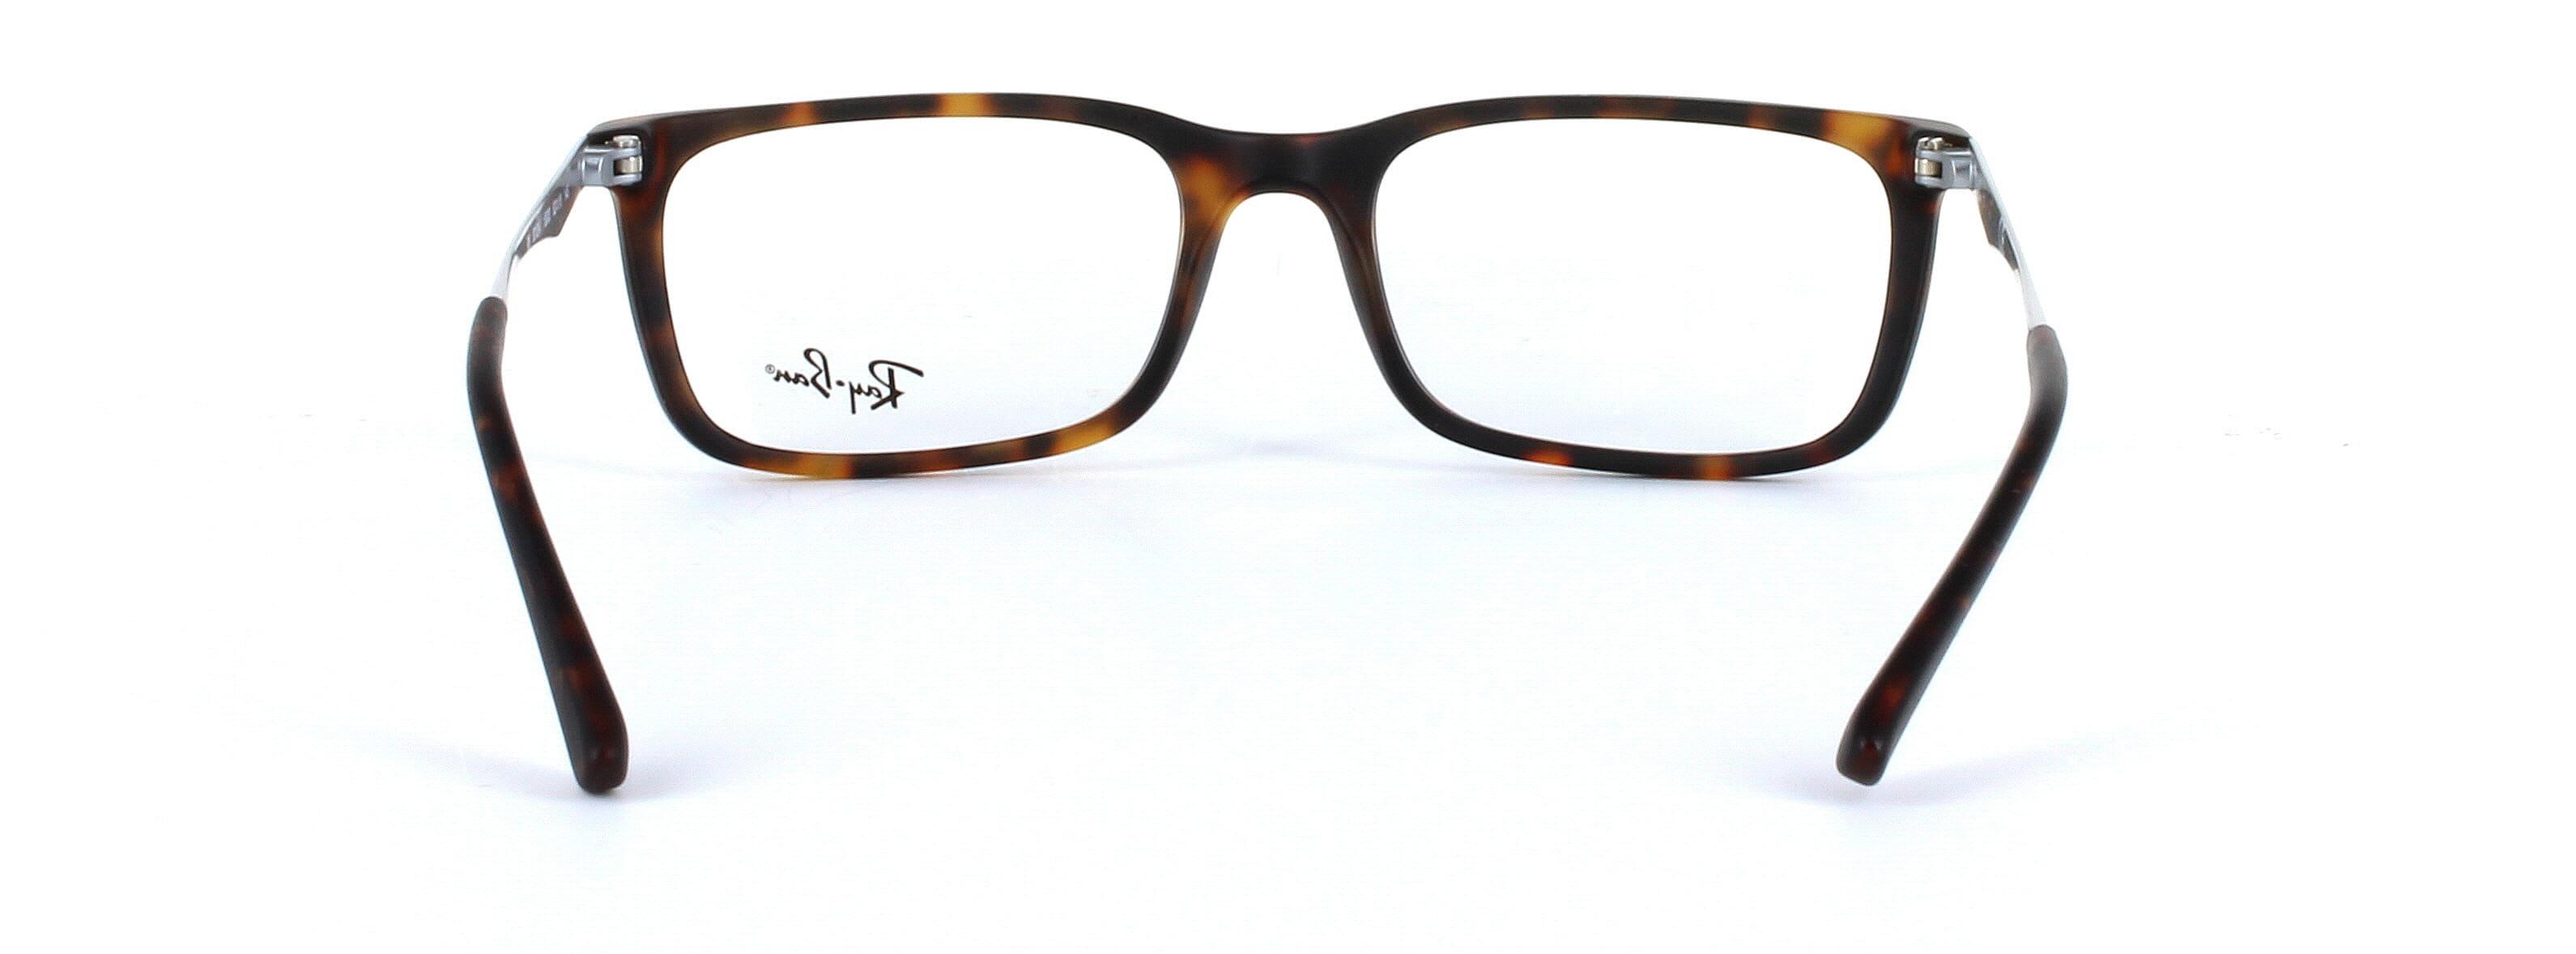 Ray ban 53121 - Unisex tortoise frame with metal arms - image 3